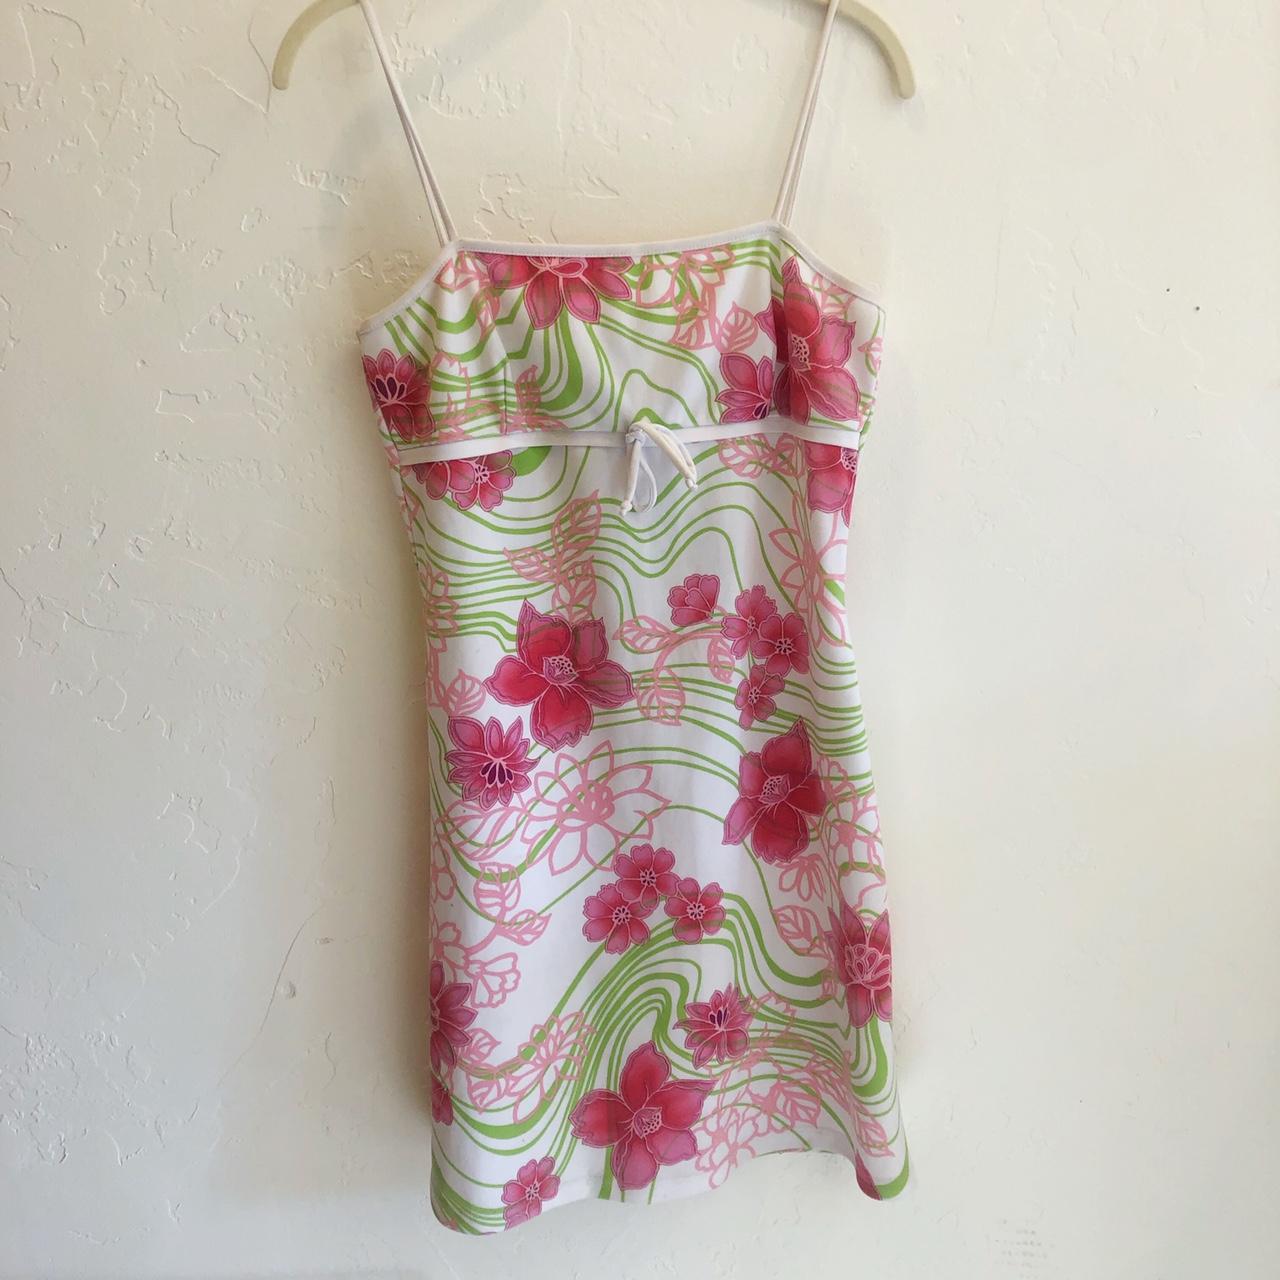 Women's Pink and White Dress | Depop